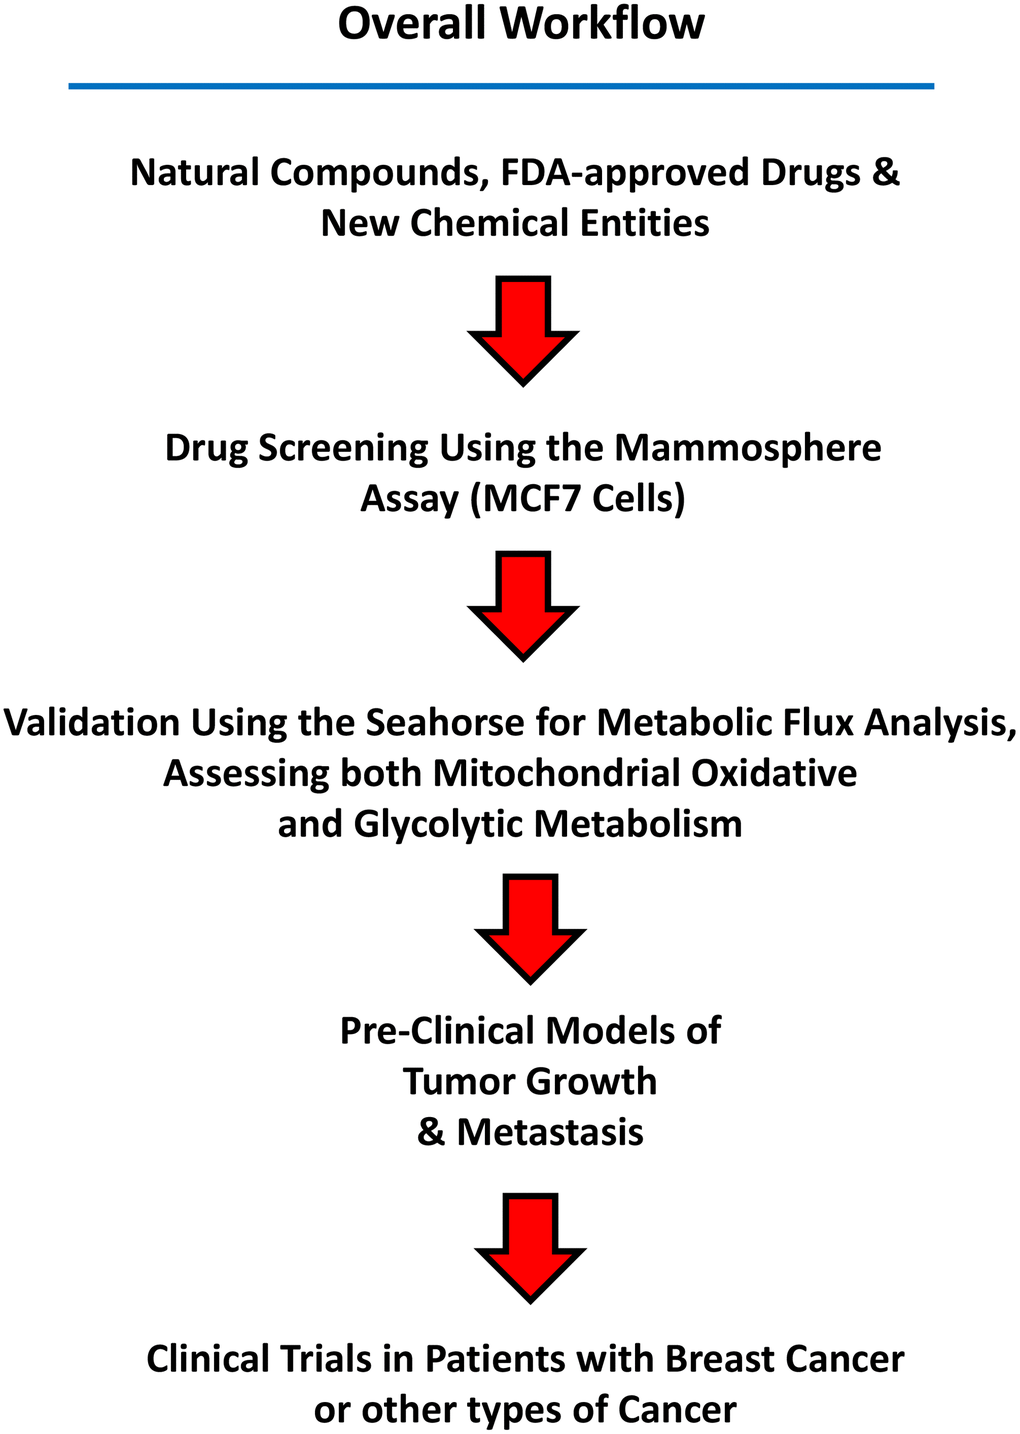 Summary of the Workflow. Candidate natural compounds, FDA-approved drugs, and/or new chemical entities are subjected to drug screening, using the 3D mammosphere assay (MCF7 cells). Positive hits are then validated as metabolic inhibitors, by using the Seahorse, to directly measure oxygen consumption and metabolic flux. Small chemical entities showing anti-mitochondrial activity can then be further validated in pre-clinical models of tumor growth and metastasis. Finally, clinical trials in patients with breast cancer (or other cancer types) can be carried out to validate in vivo that a given compound eradicates CSCs, using CSC-specific markers, such as CD44 and ALDH1 by immuno-histochemistry.